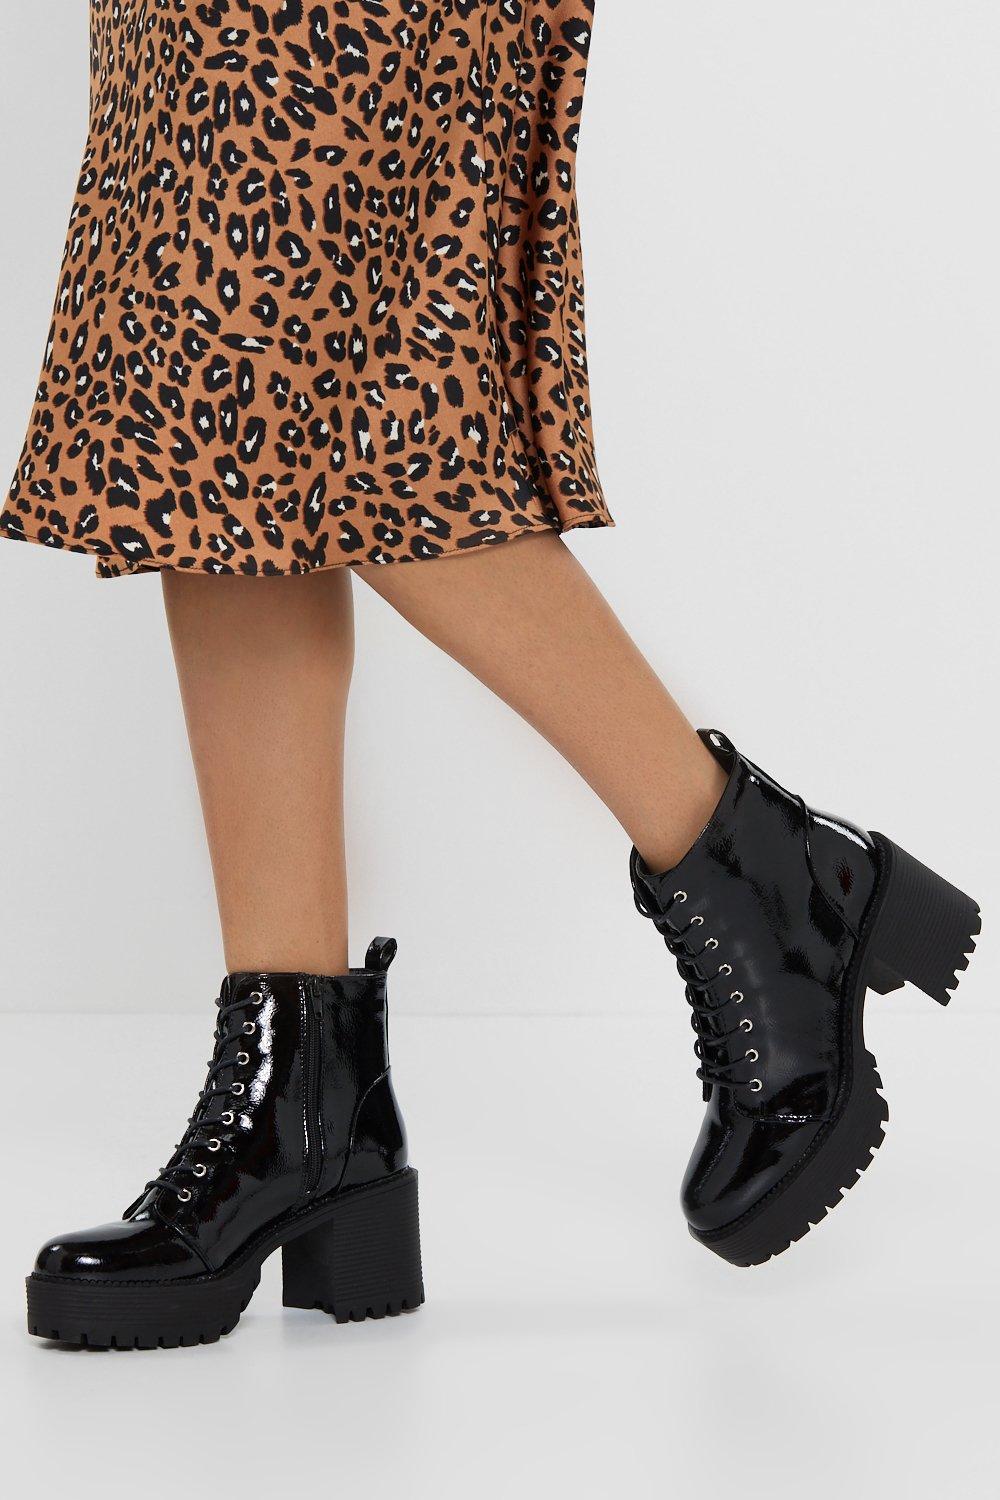 black chunky boots outfit